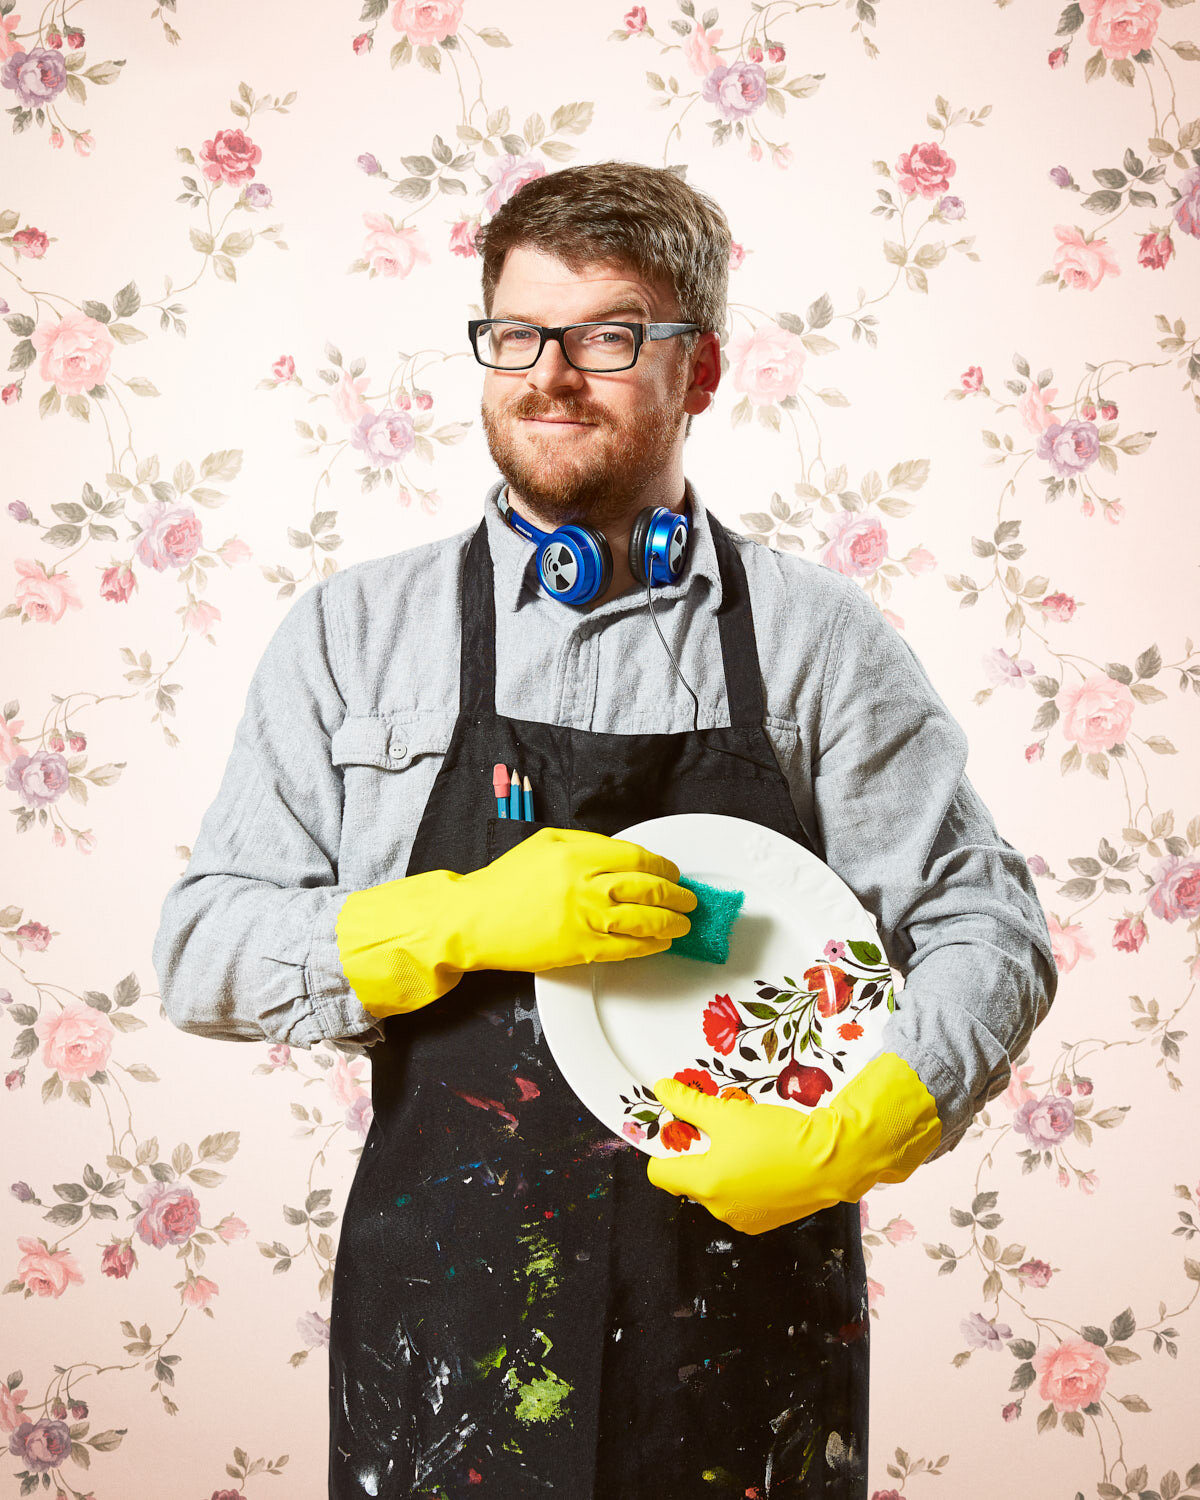 dad with headphones, artist apron, and dish gloves washing a dish with vintage floral wallpaper by conceptual portrait photographer Hanna Agar